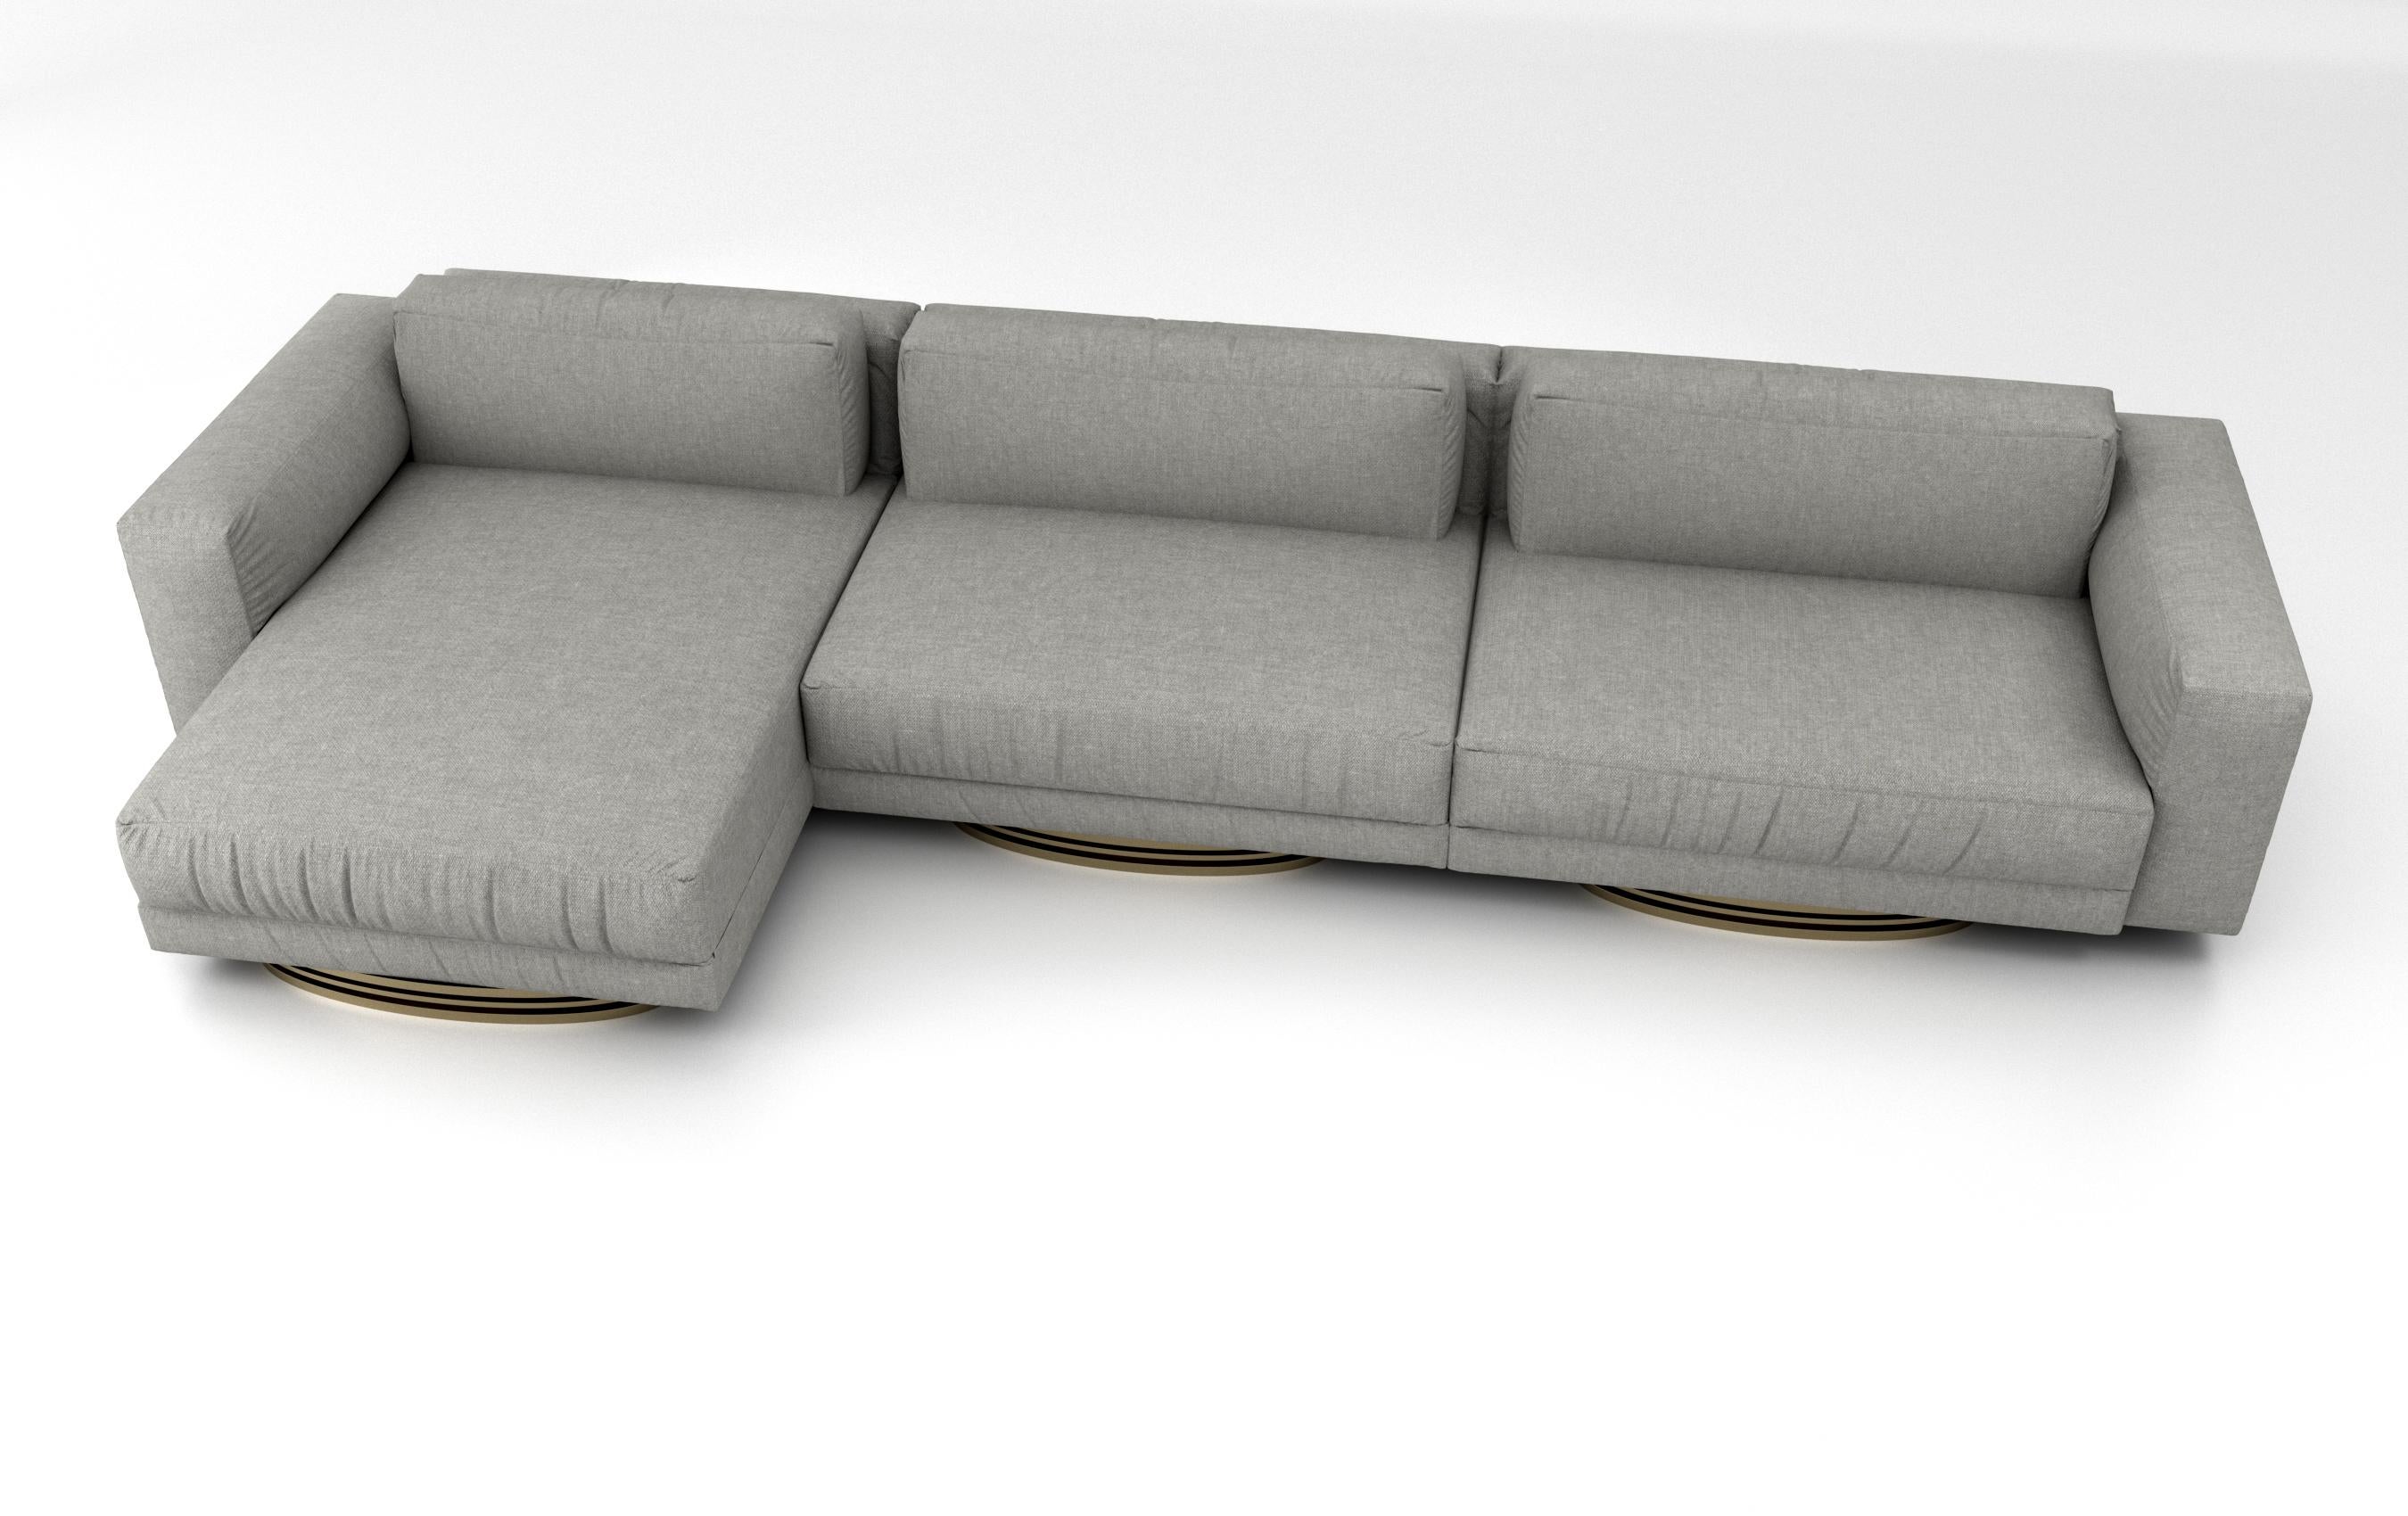 Italian BOLSA SECTIONAL CHASE - Modern Design in Cotton with Metallic High Gloss Bases